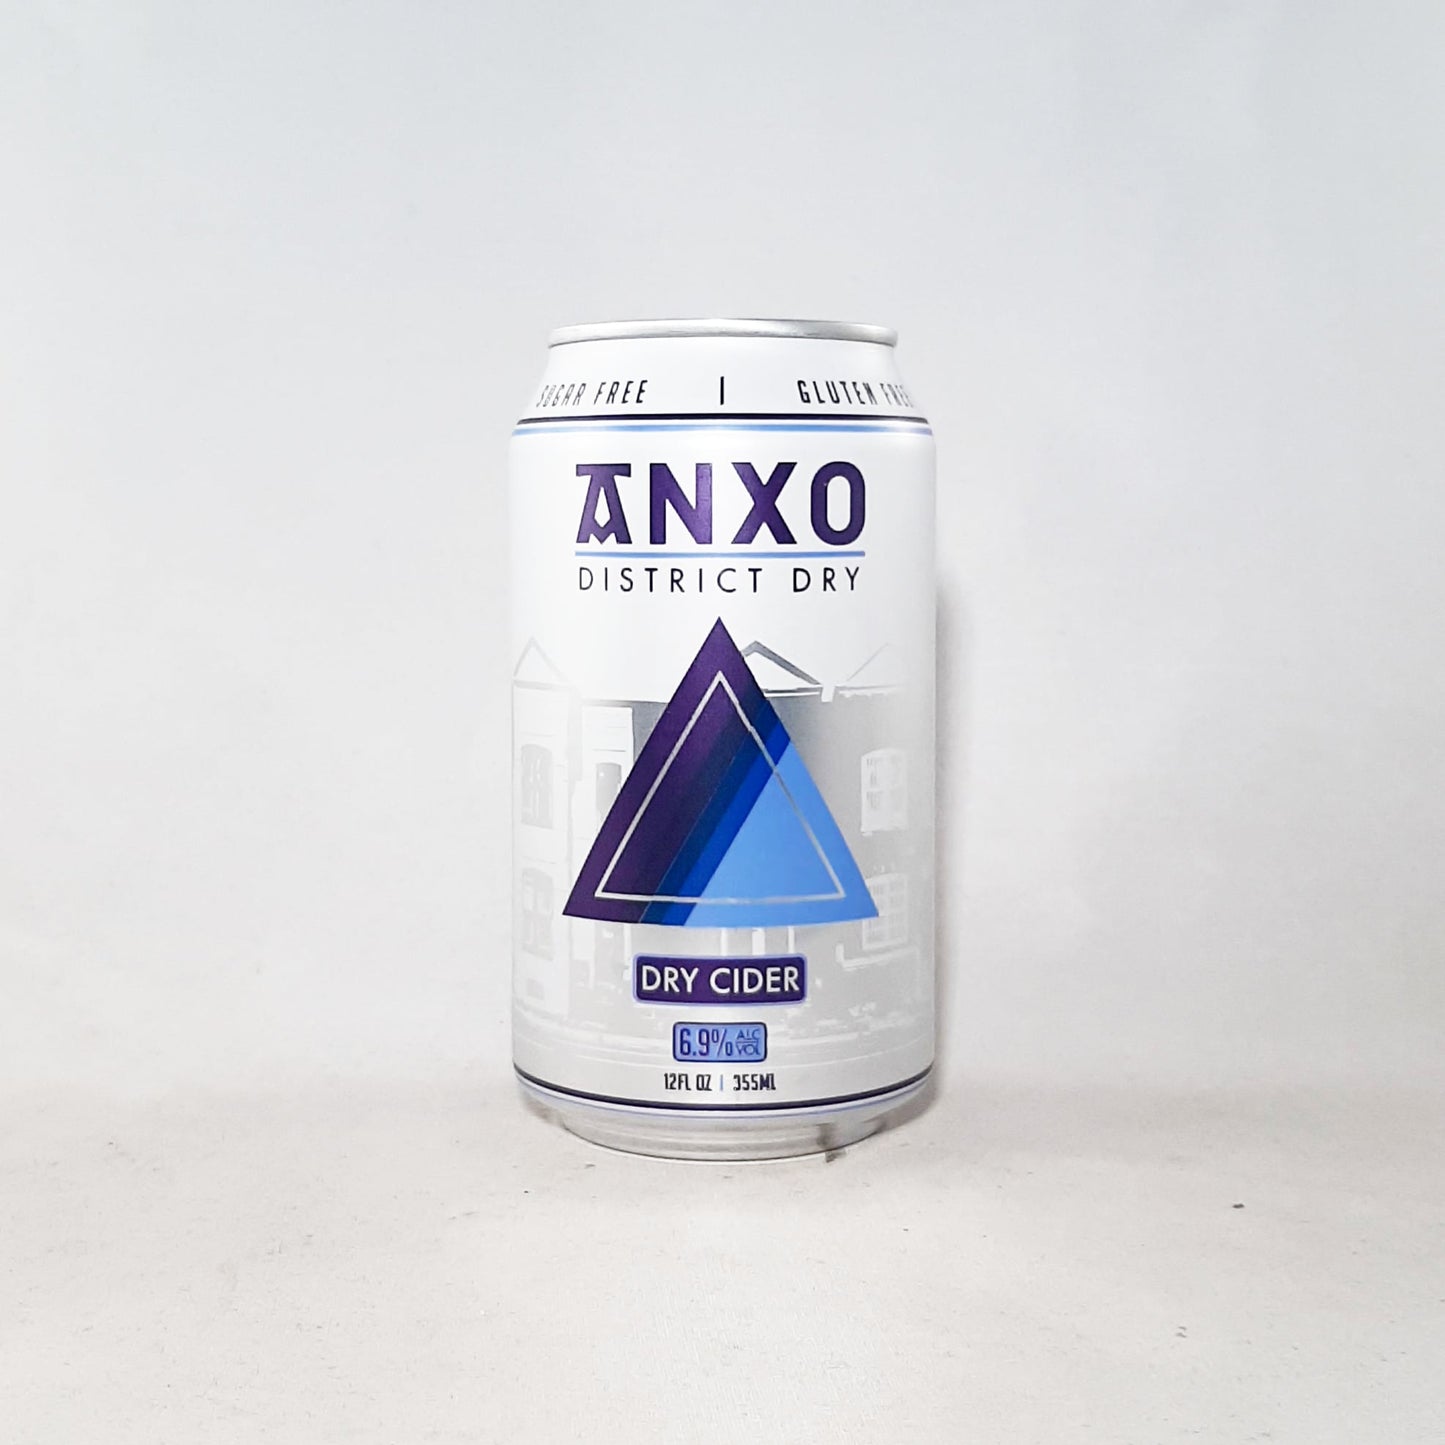 ANXO District Dry Cider